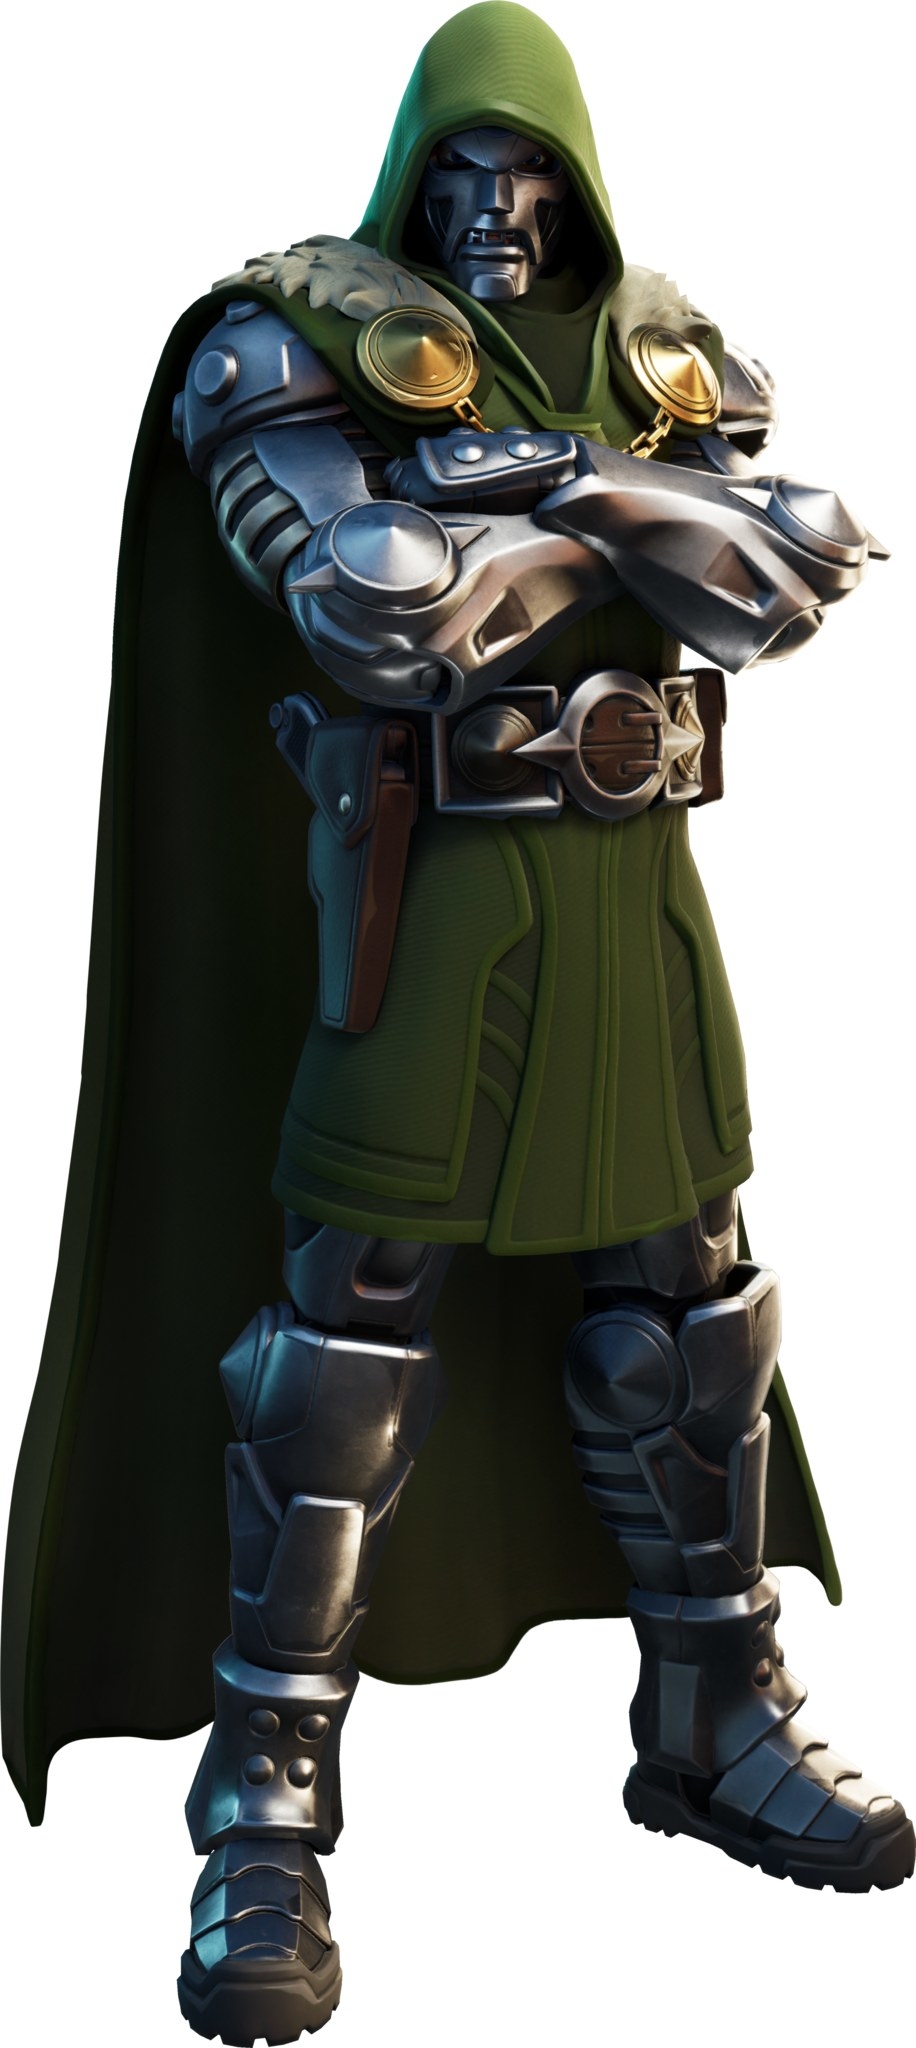 Fortnite skin of Doctor Doom poses with his arms crossed